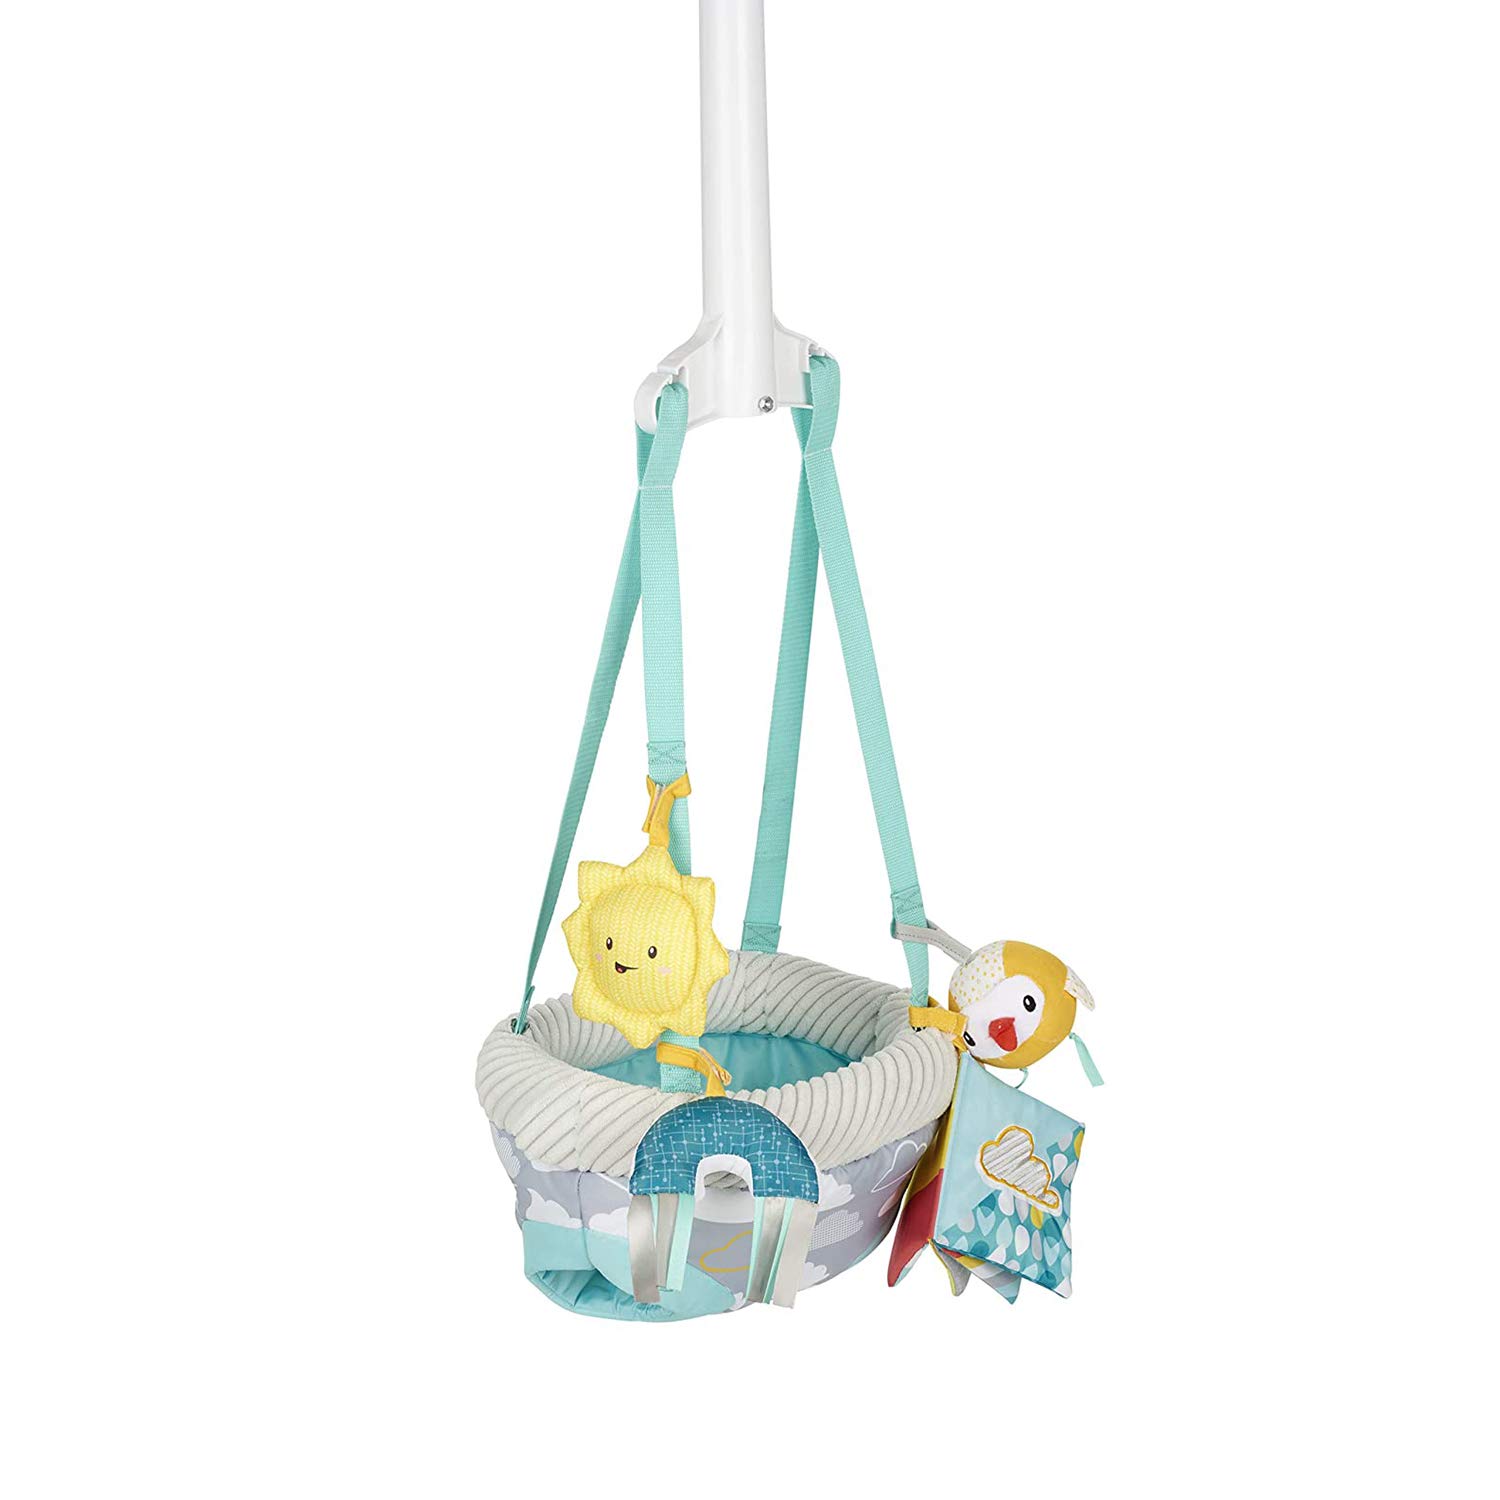 Evenflo Exersaucer Baby Hanging Clampable Doorway Jumper with 4 Removable Toys, Peek a Boo Flip -Book, and Mirror, Sweet Skies